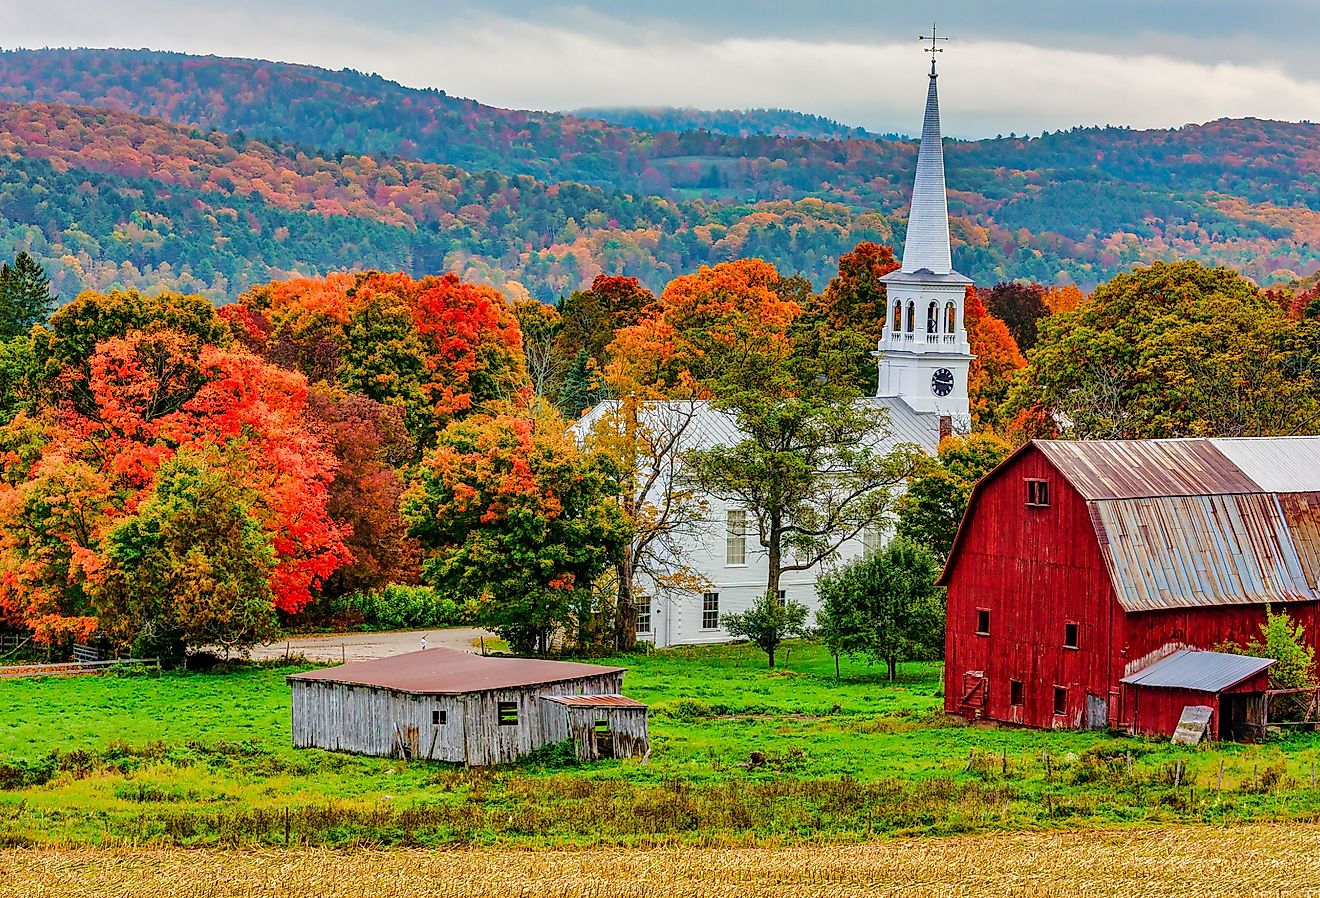 Red barn and church in Woodstock, Vermont. Image credit MindStorm via Shutterstock